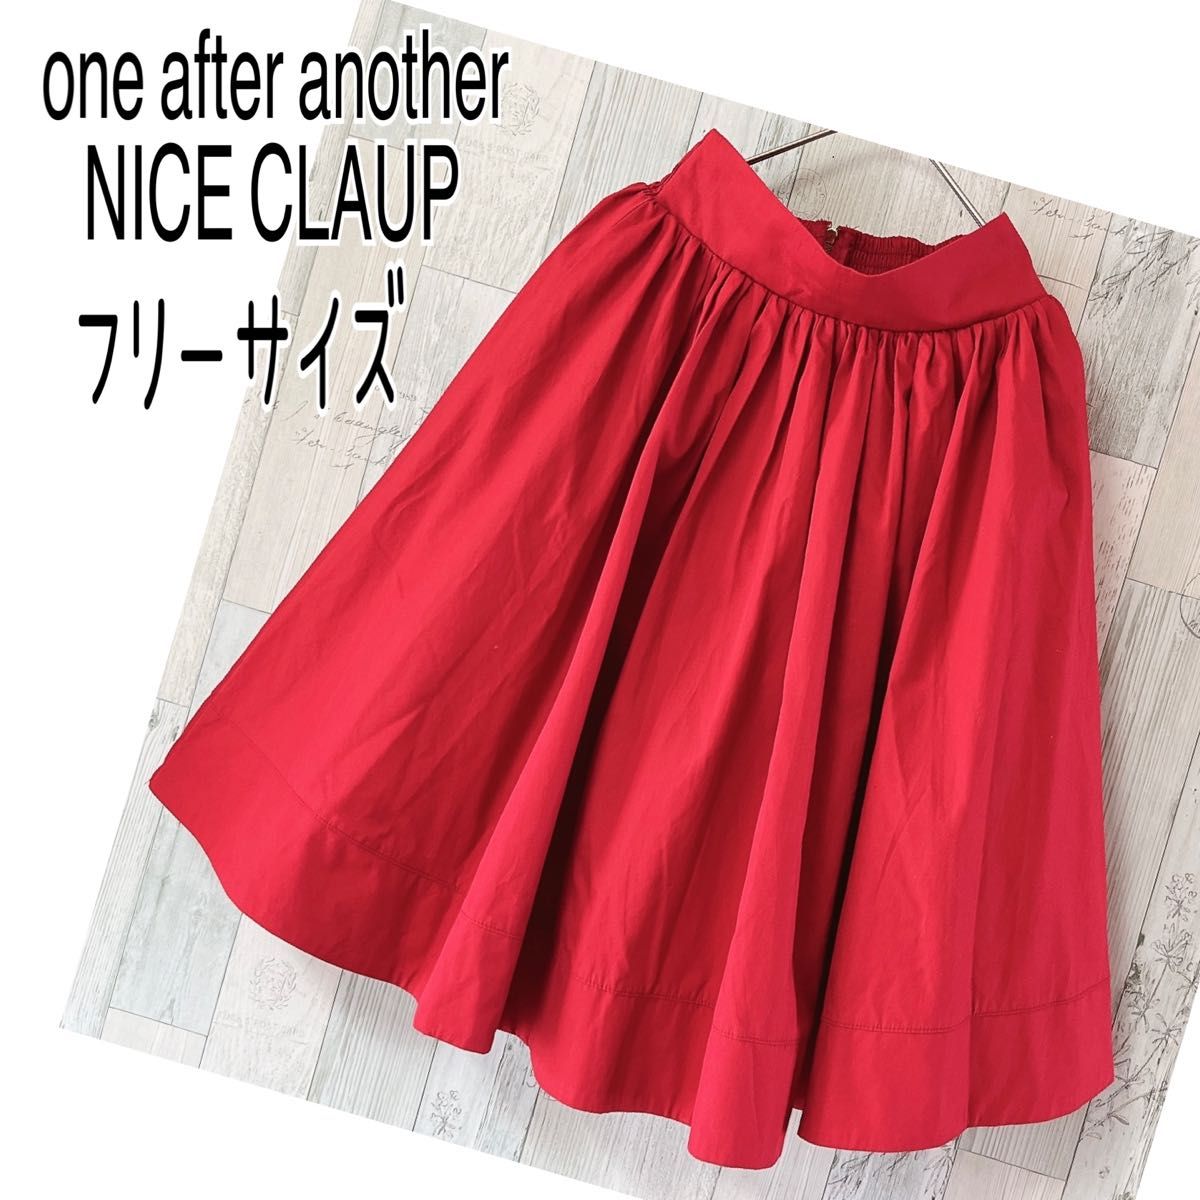 one after another NICE CLAUP【美品】ギャザースカート　膝丈　フレアスカート　フリーサイズ　鮮やかレッド